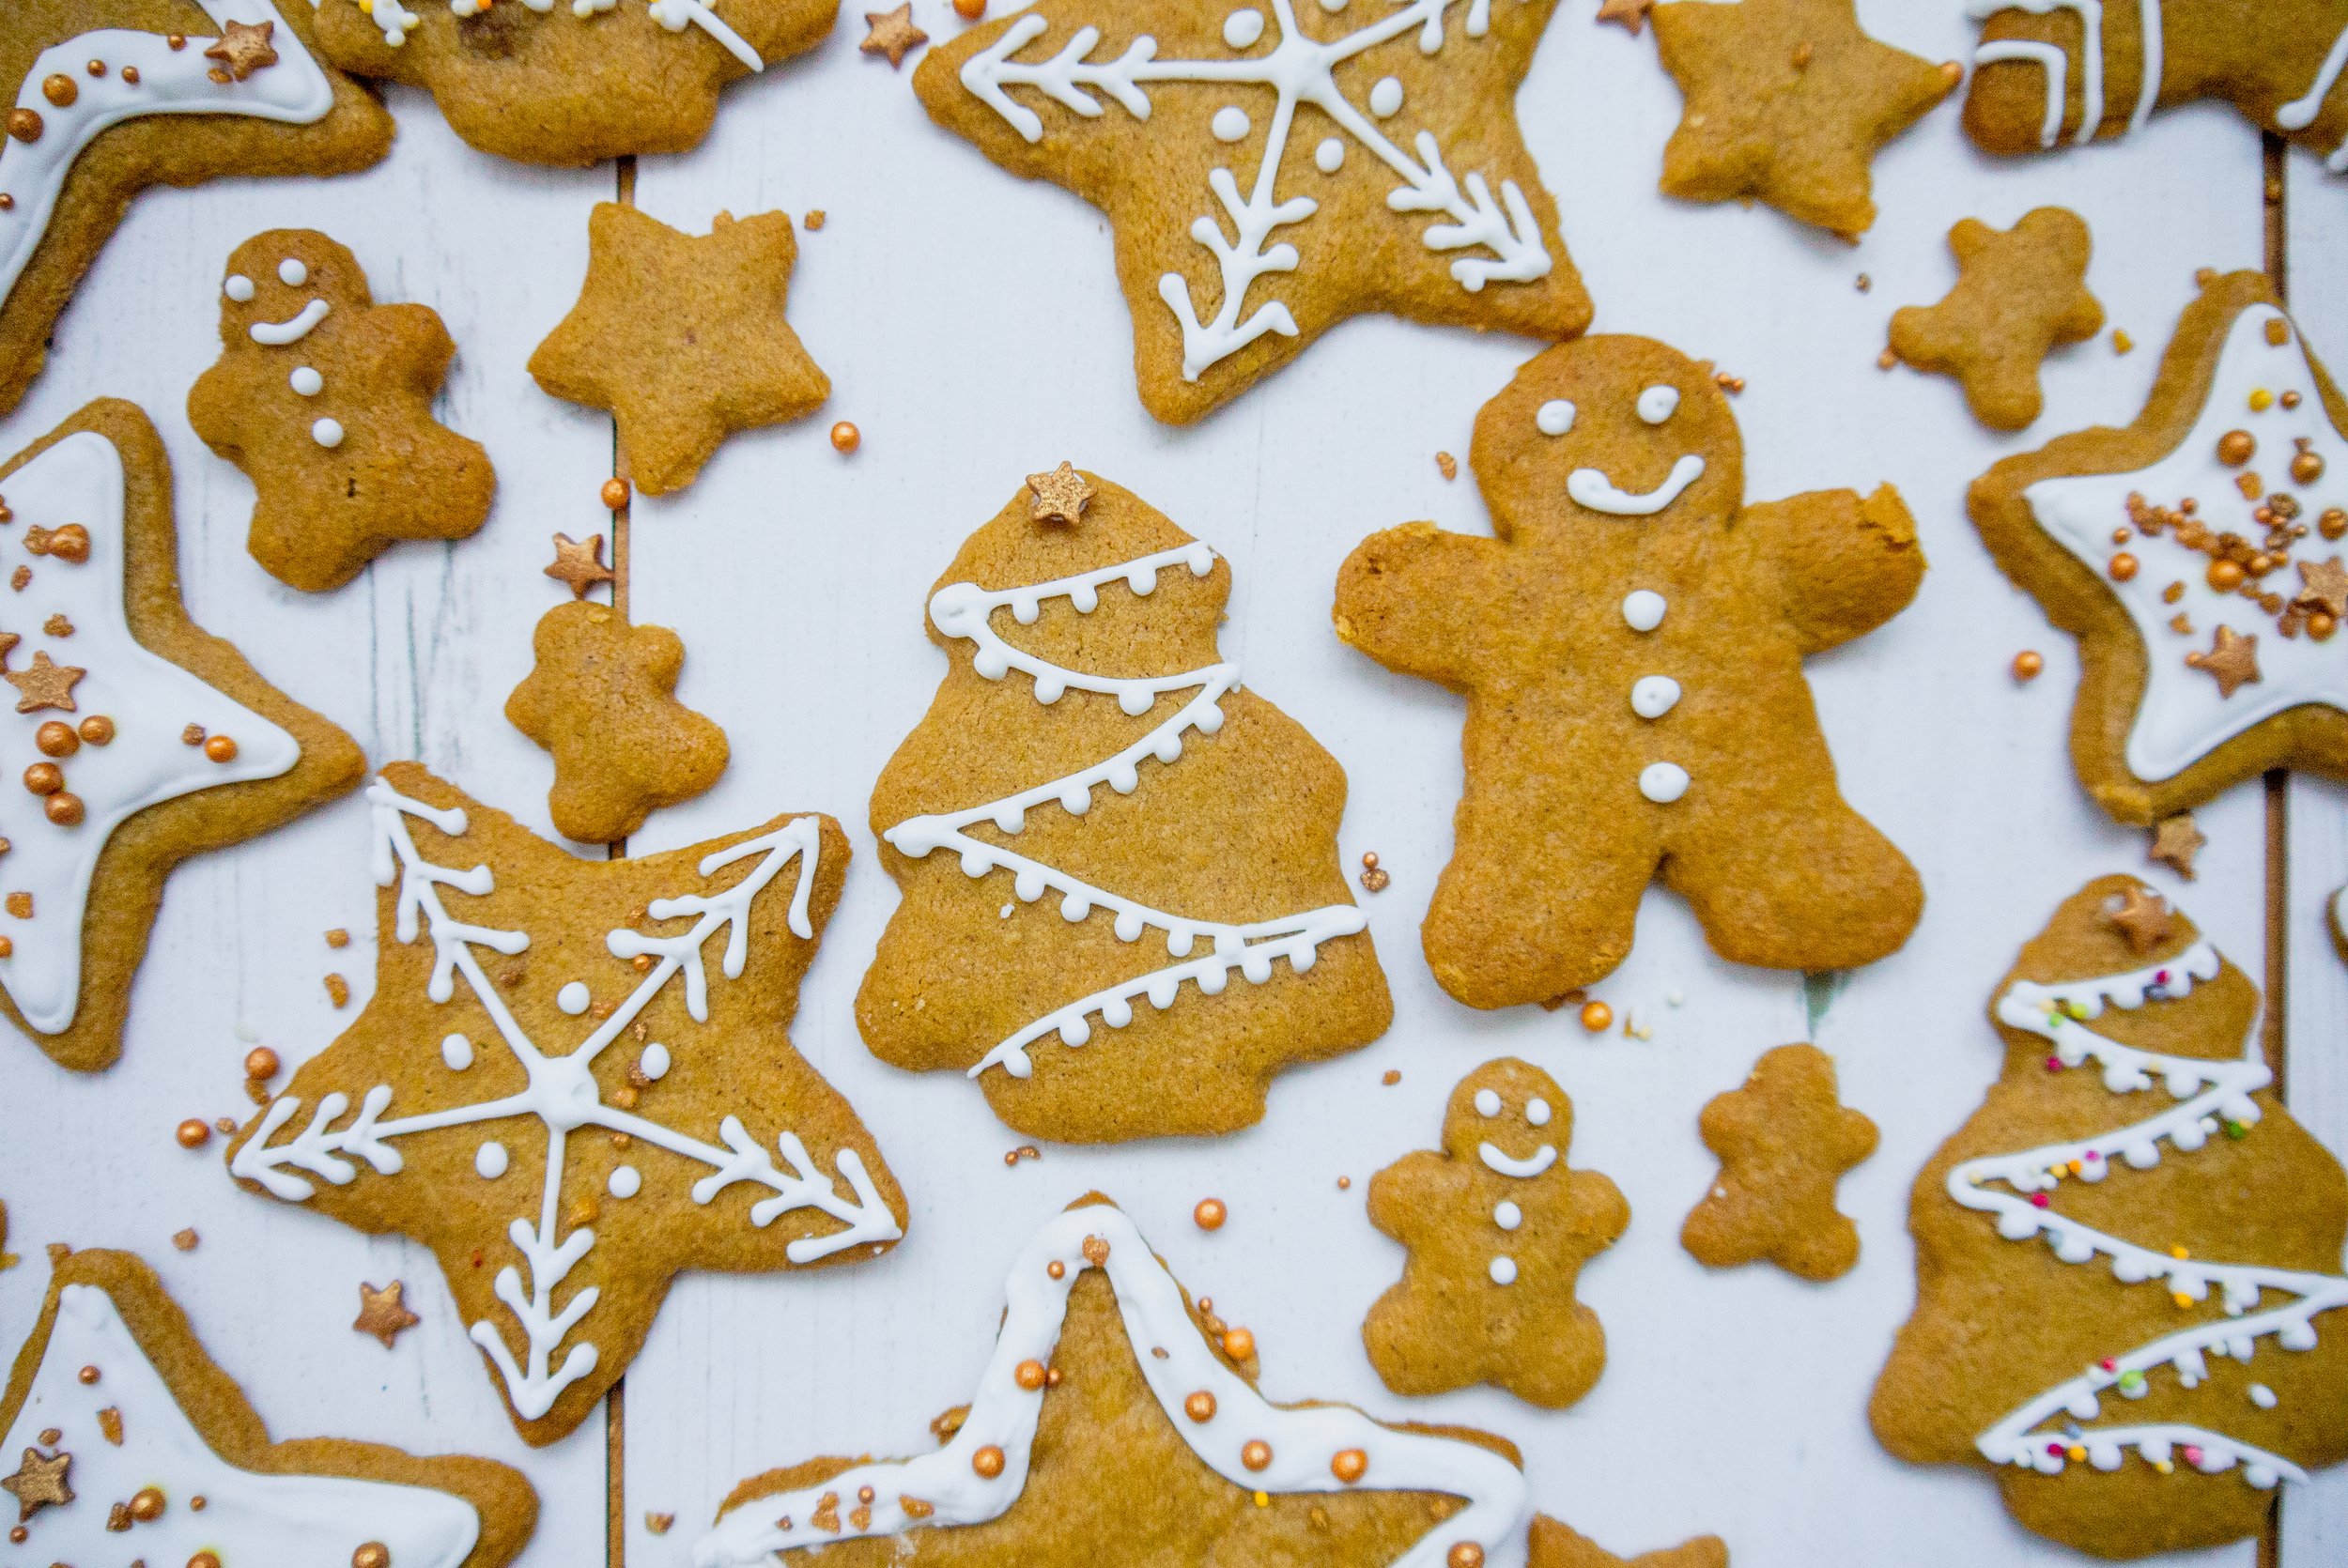 gingerbread cookies from scratch  by kam sokhi allergy chef